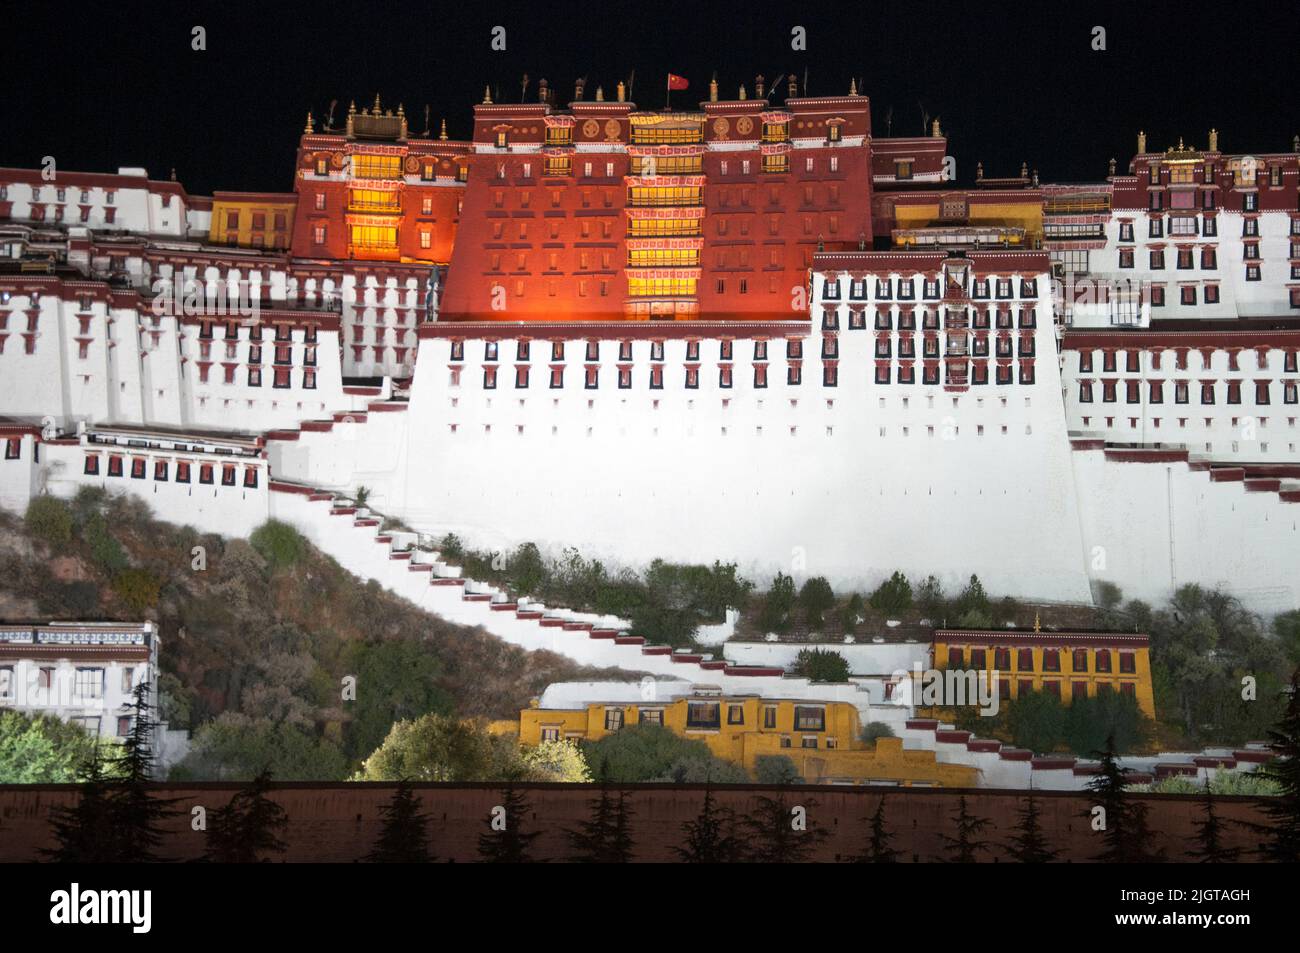 Potala Palace at night, Lhasa, Tibet, China, until 1959 the winter seat of the Dalai Lama's theocratic government of independent Tibet Stock Photo